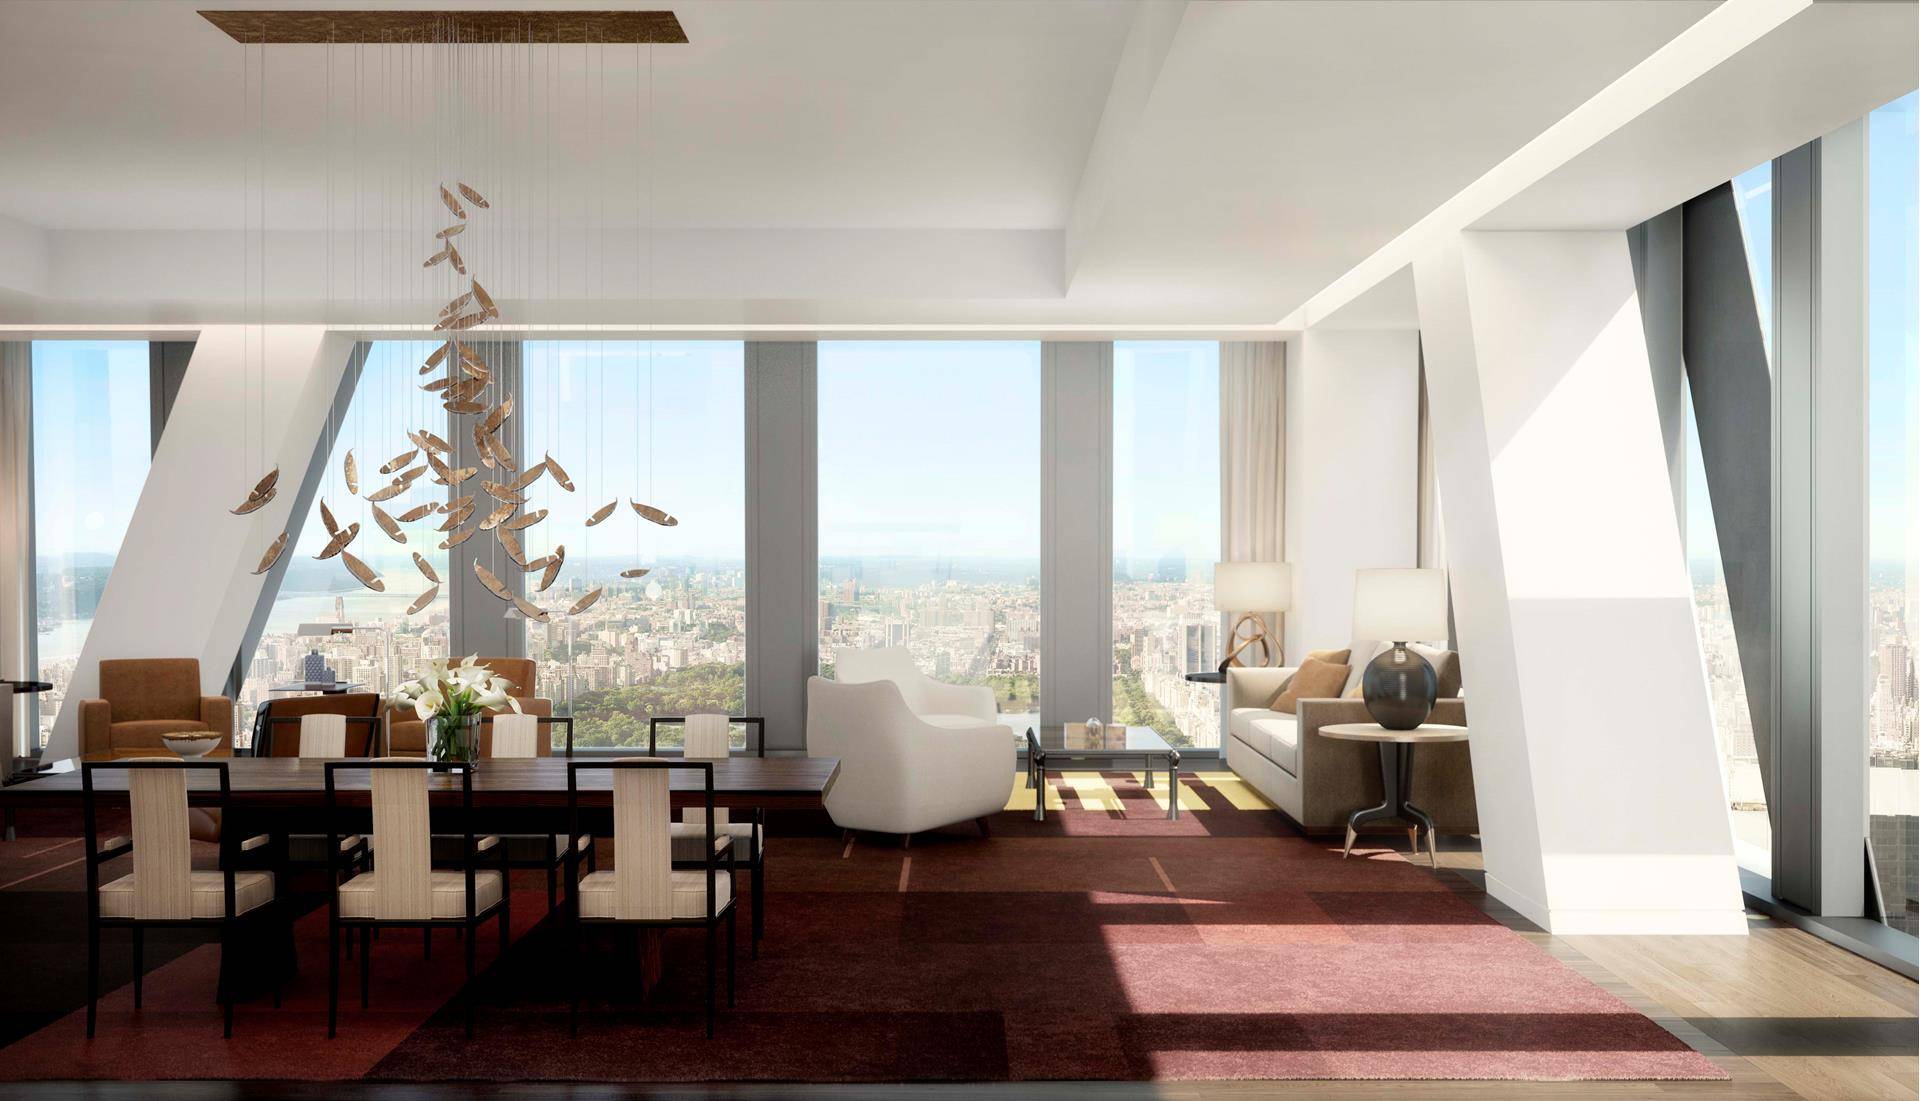 Comprising the entire 78th and 79th floors for an astonishing total of 7, 455 square feet, Penthouse 78 stands out as a truly palatial residence atop Jean Nouvel's iconic crystalline ...